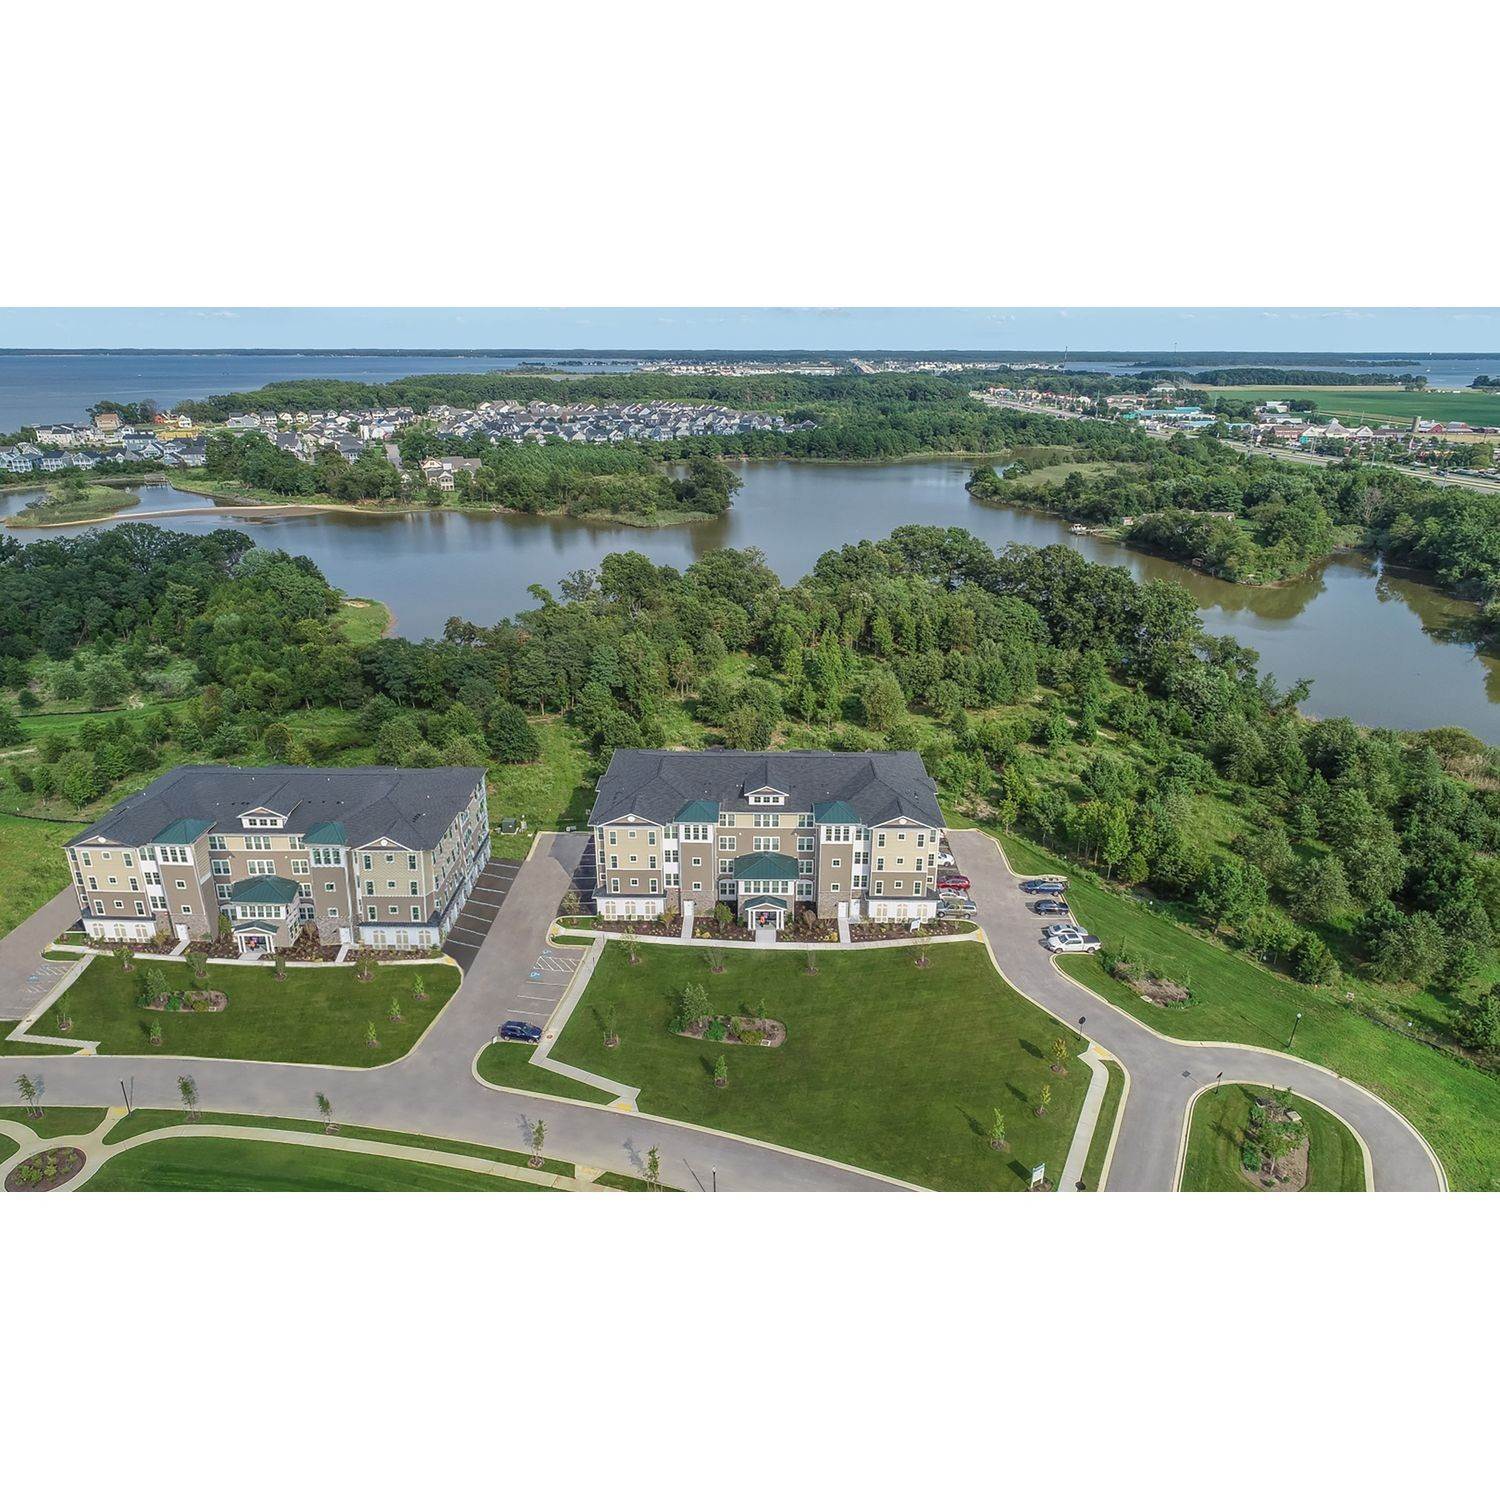 5. K. Hovnanian’s® Four Seasons at Kent Island - Luxury Condos xây dựng tại 131 Flycatcher Way, Chester, MD 21619